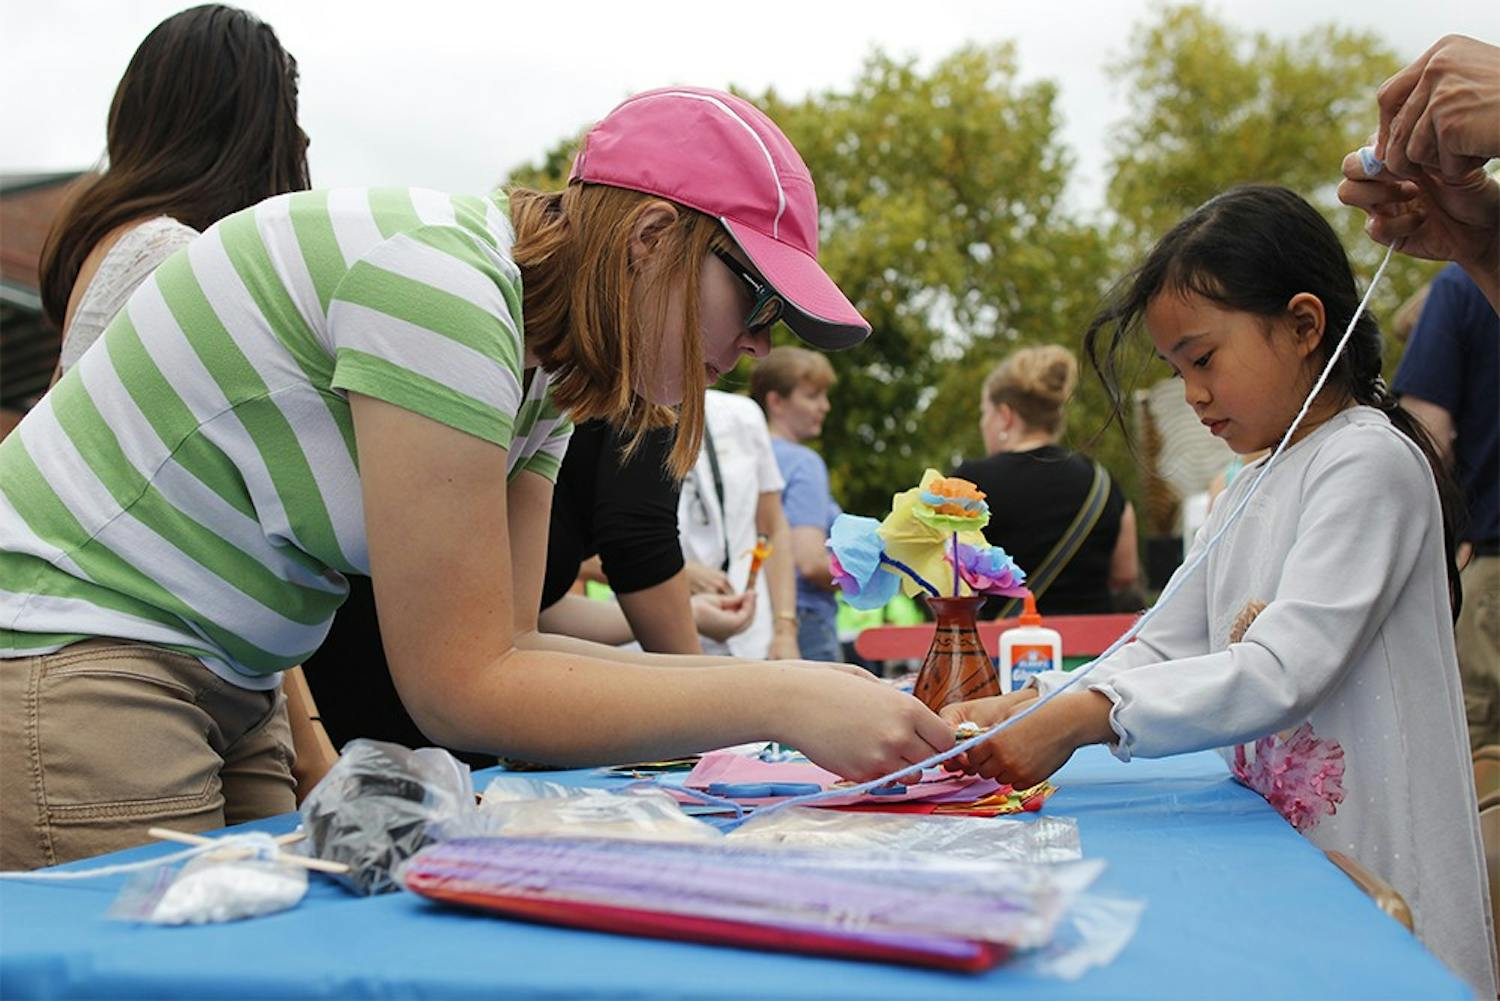 Mary Bolander, a volunteer with the Bloomington Sister Cities program helps Sasha Luhur, age 6, make a craft with yarn and popscicle sticks during the "Fiesta del Otoño" at Showers Plaza during the Farmer's Market Saturday.